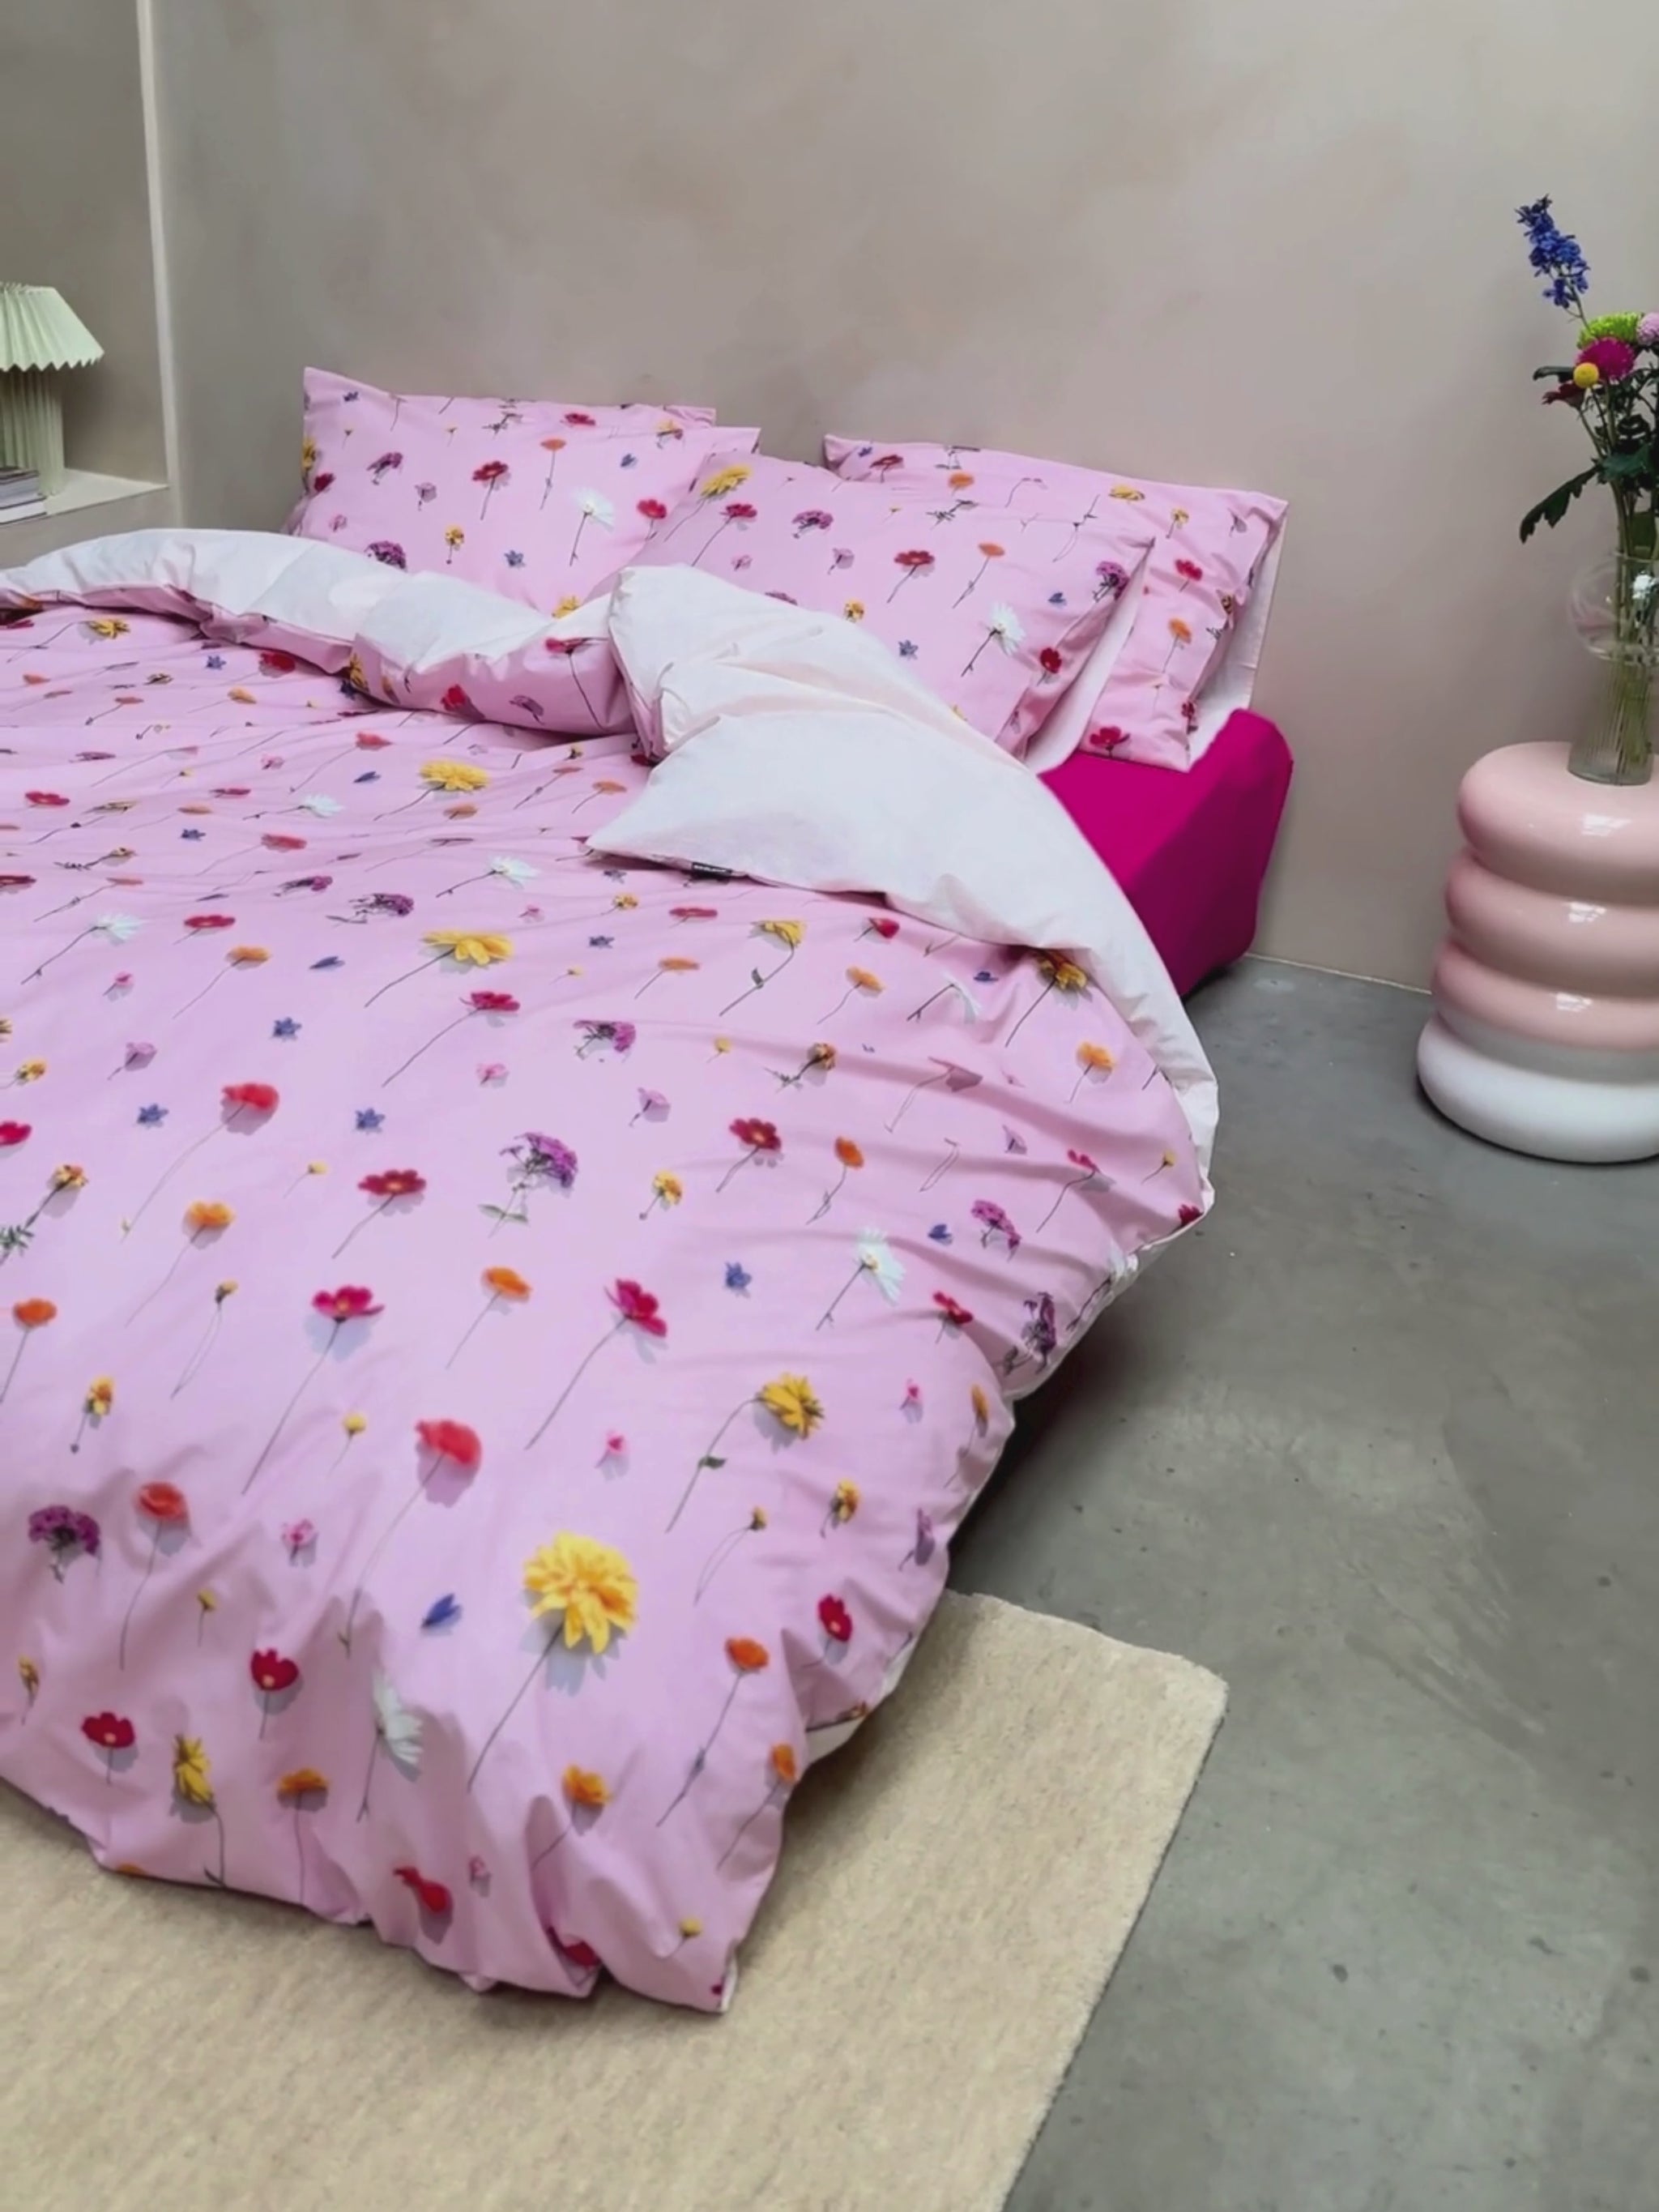 Video of the Bloom Pink duvet cover